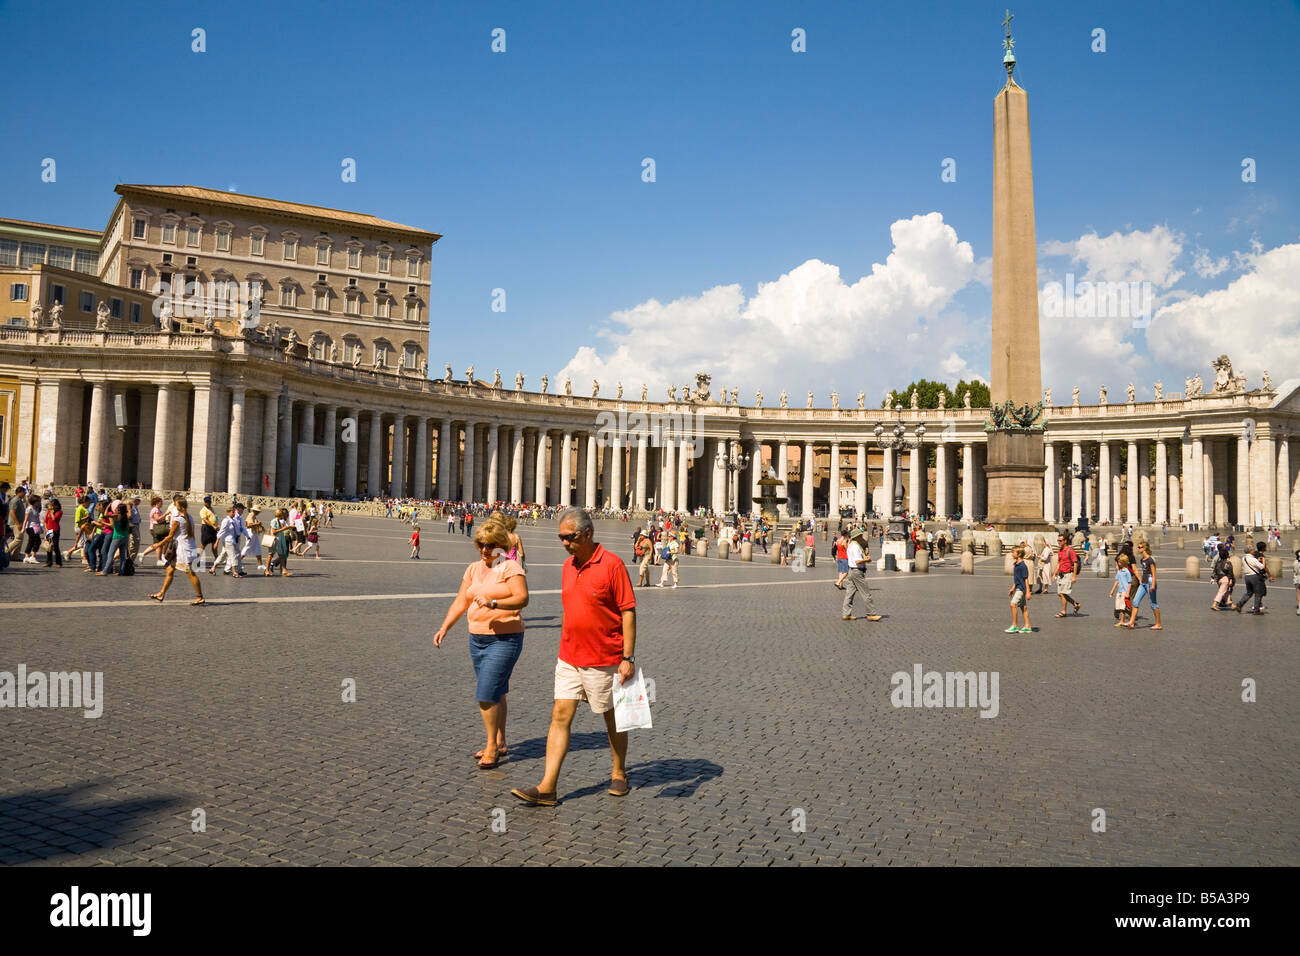 Tourists, obelisk and colonnade, Saint Peter’s Square, Piazza San Pietro, Vatican City, Rome, Italy Stock Photo